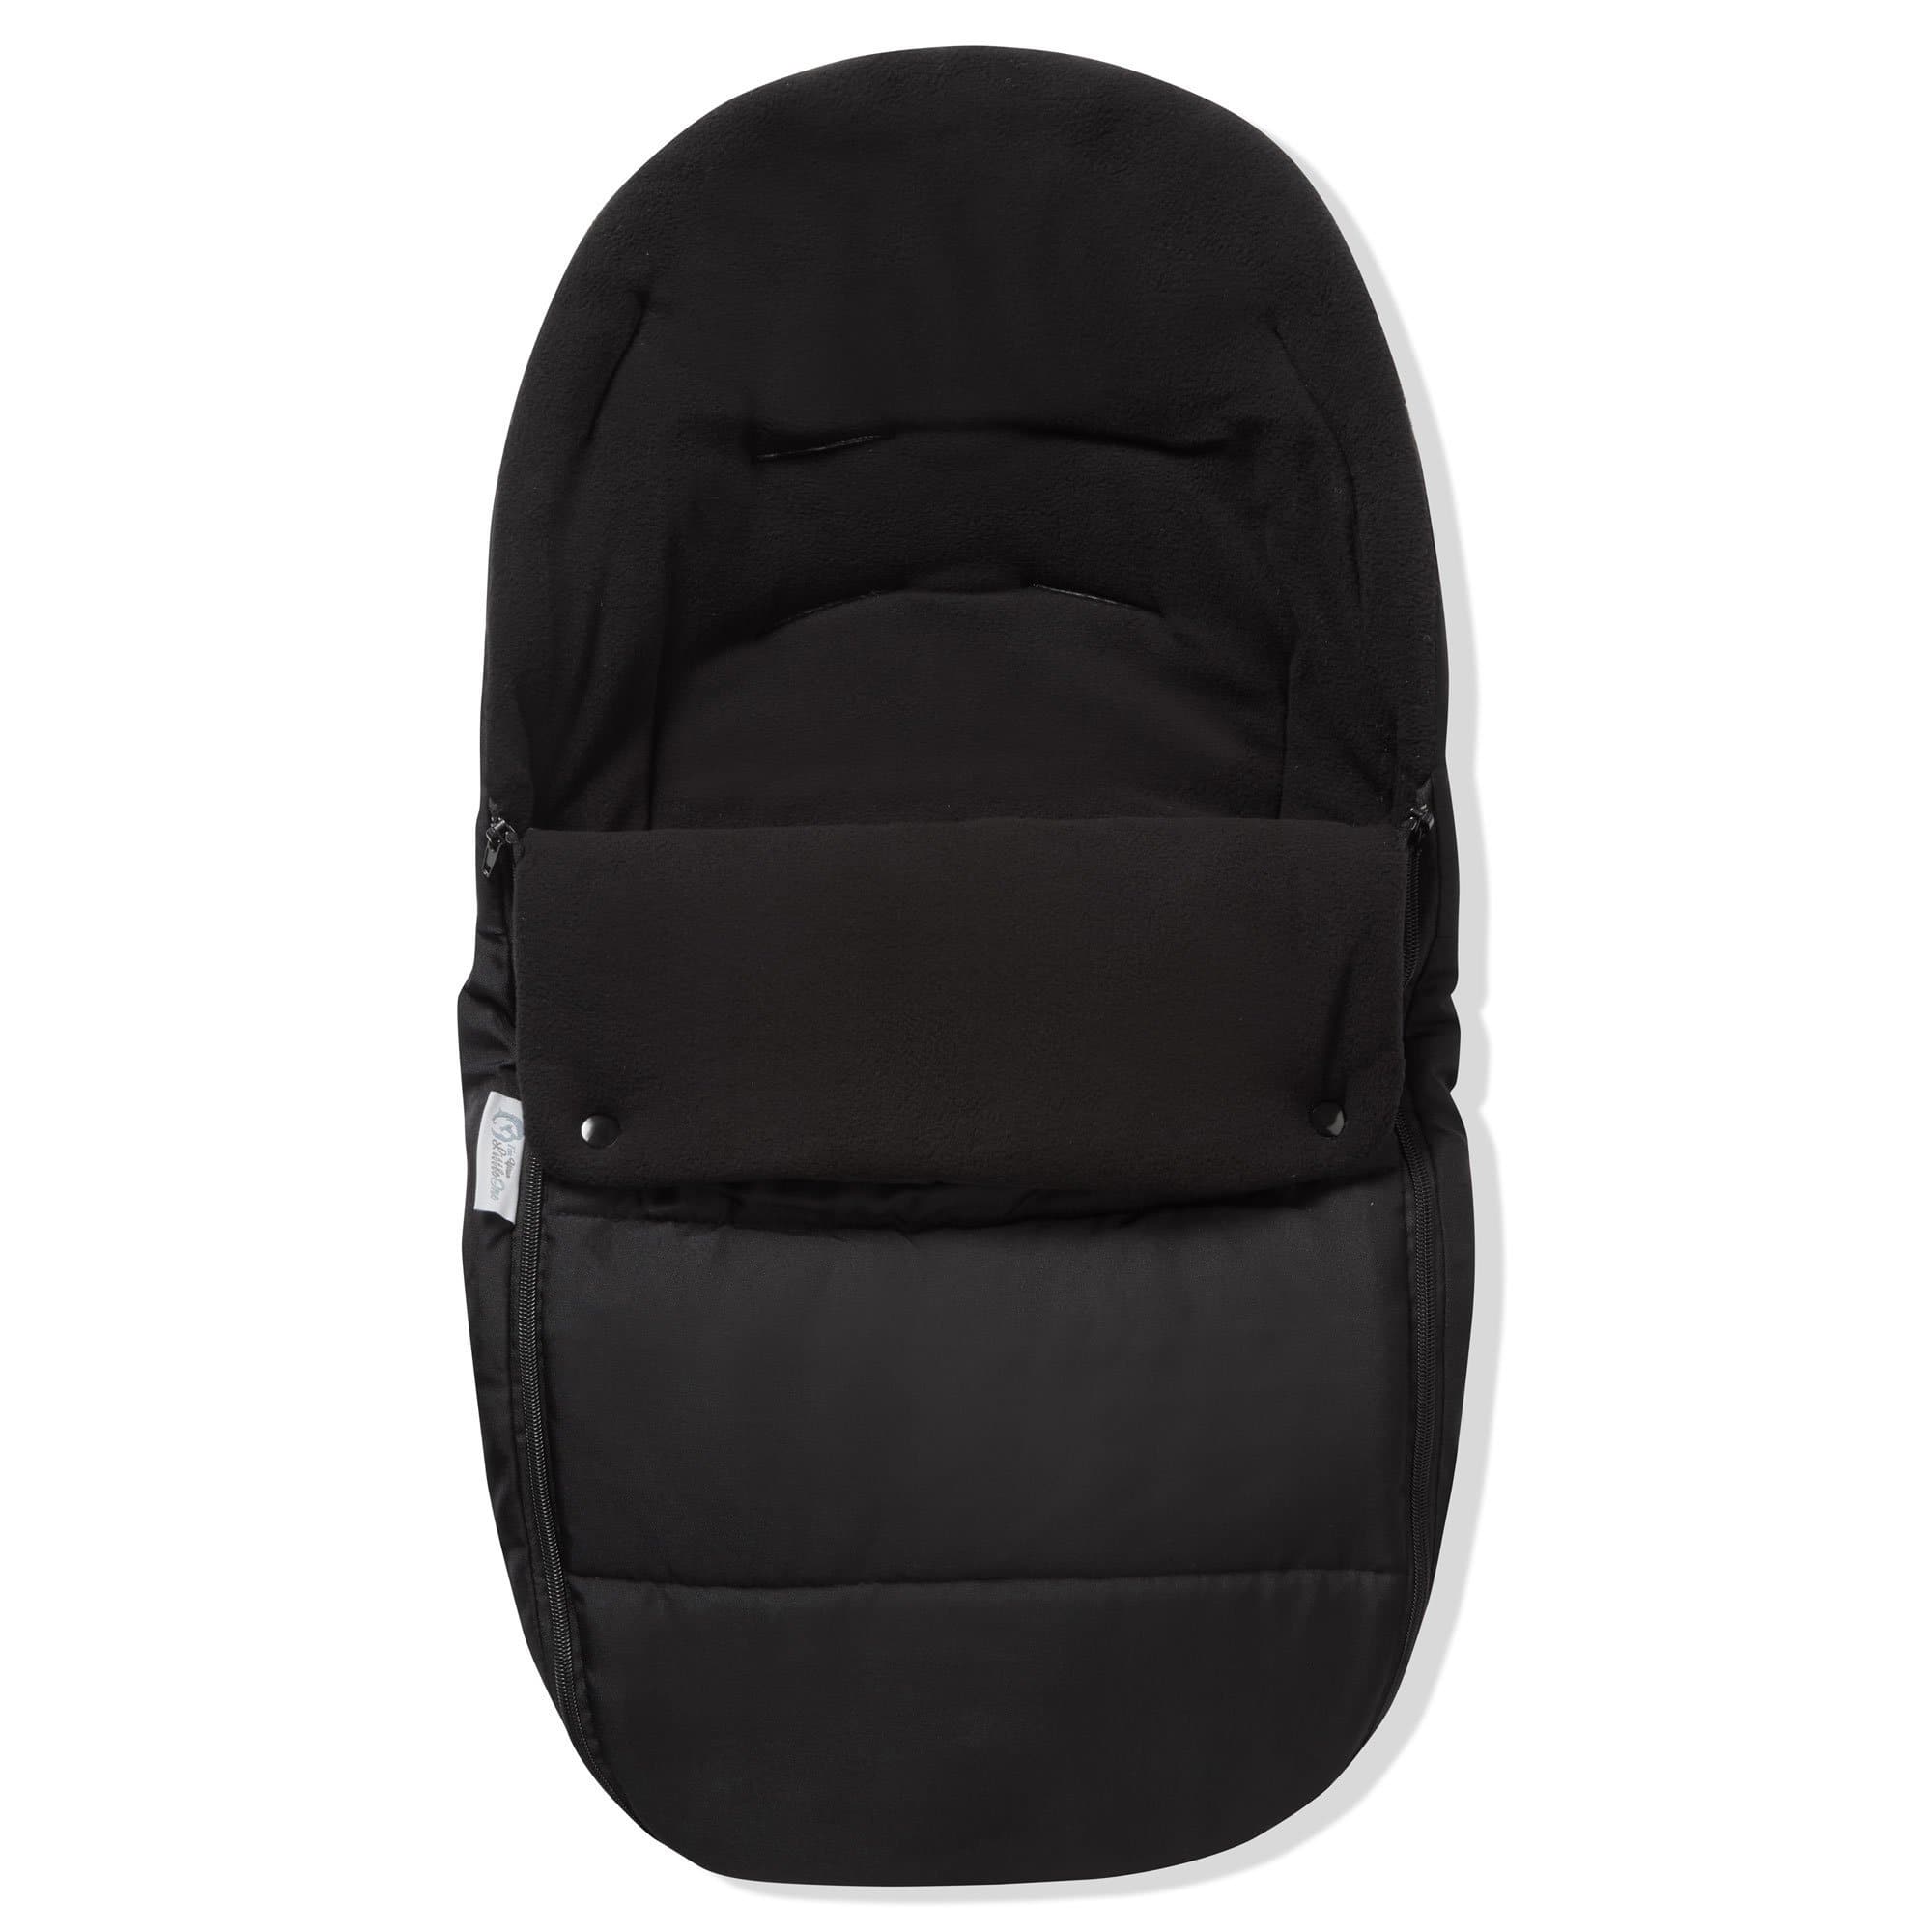 Premium Car Seat Footmuff / Cosy Toes Compatible with Kinderkraft - Black Jack / Fits All Models | For Your Little One